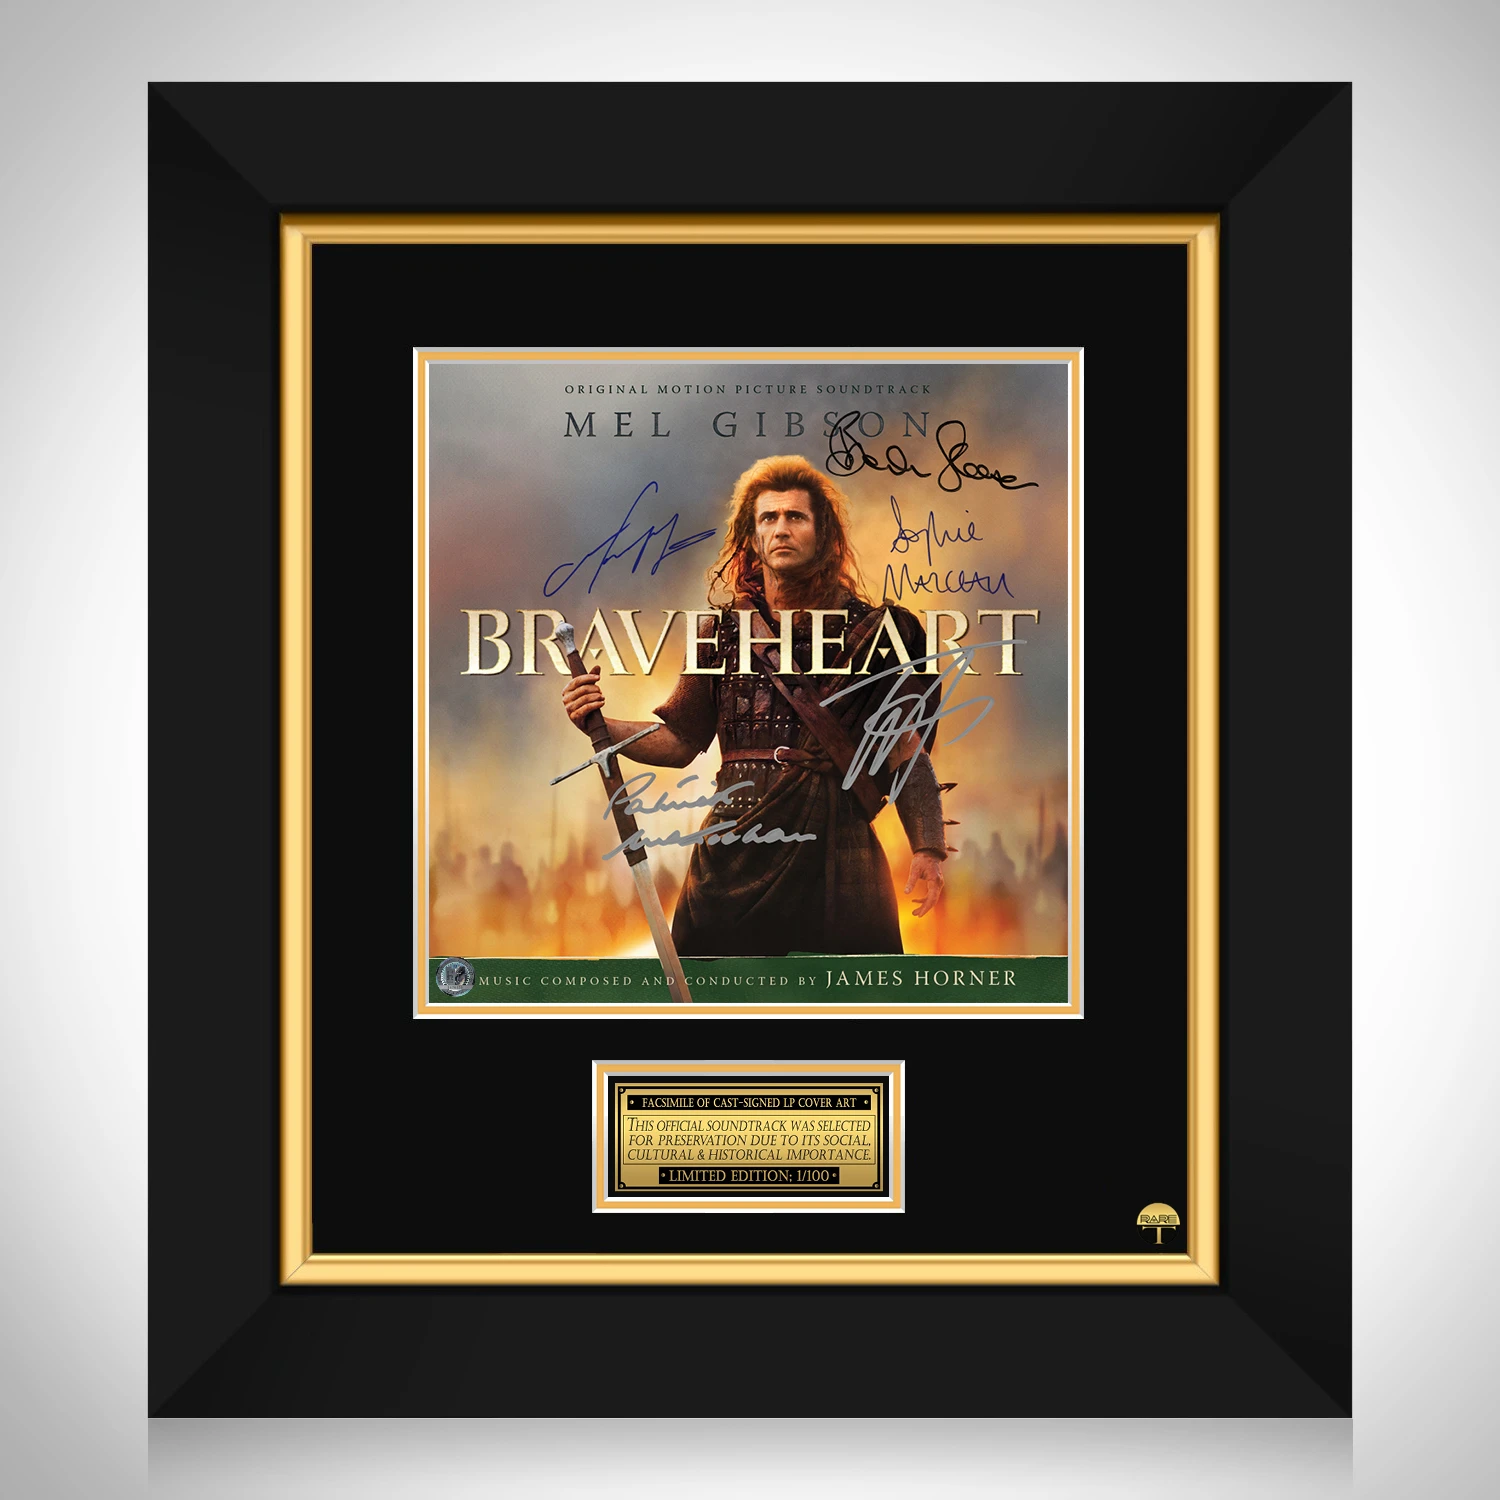 Braveheart Soundtrack LP Cover Limited Signature Edition Custom Frame - $246.73